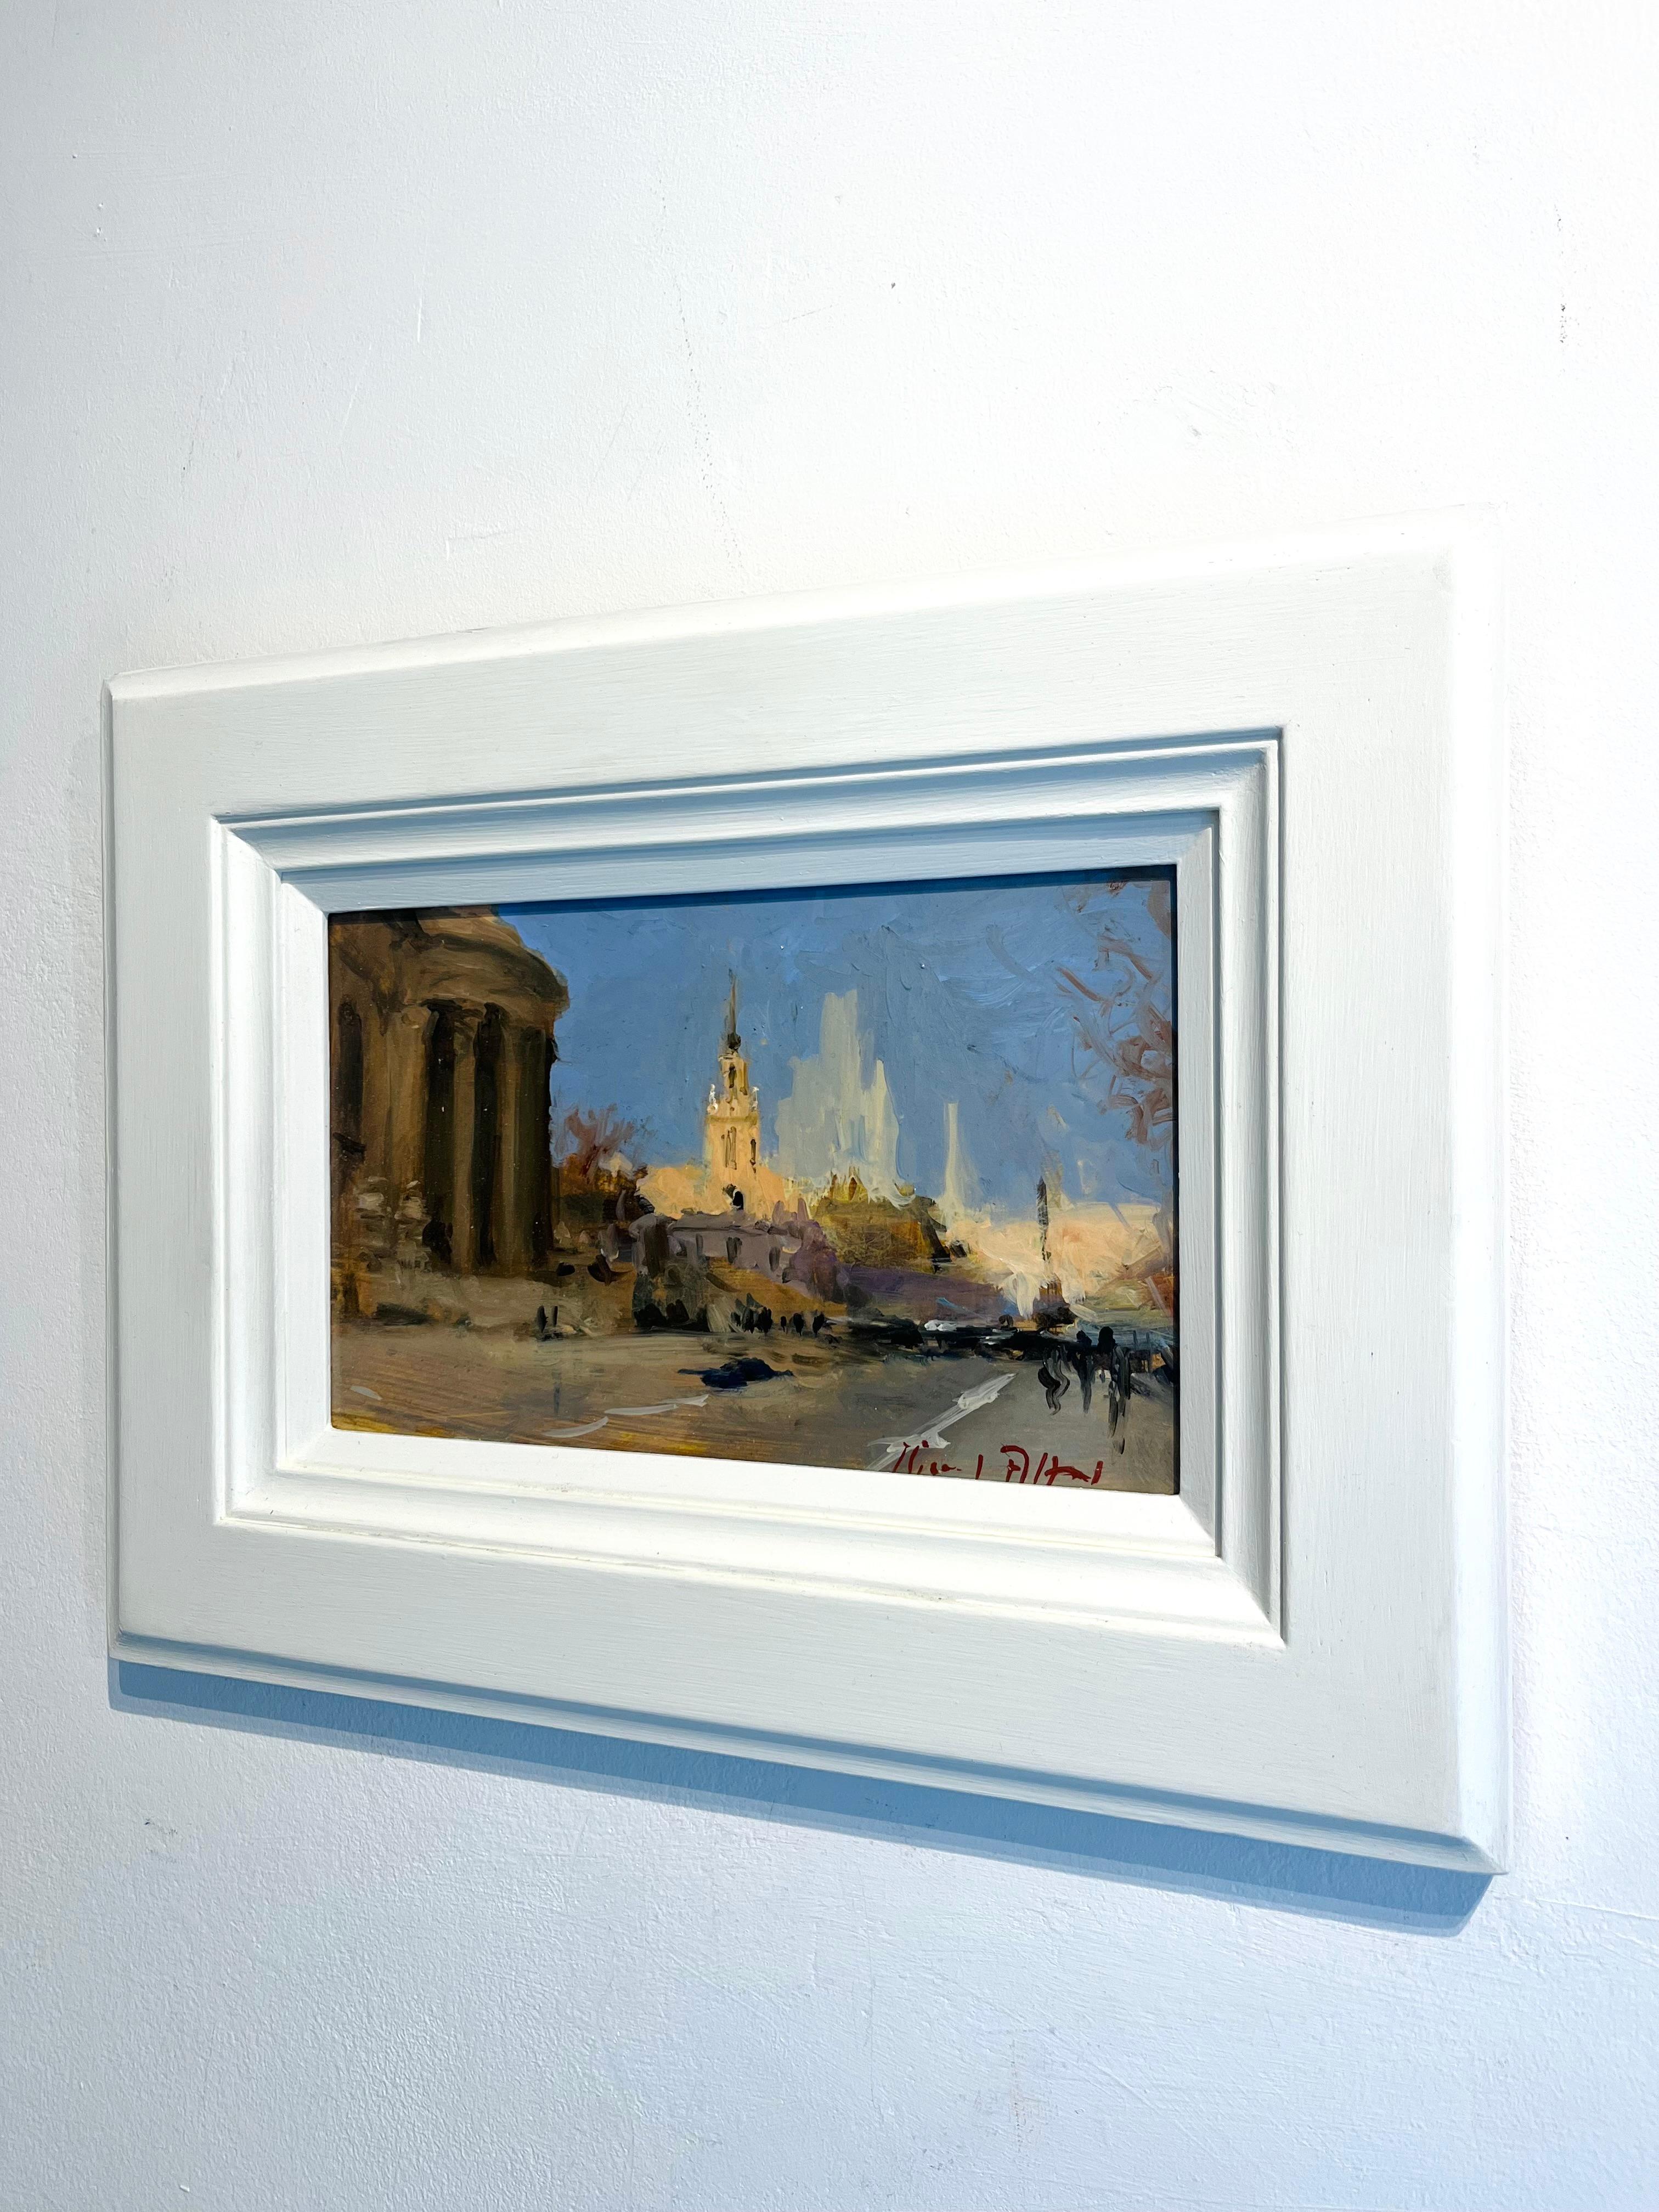 Cannon Street-original impressionism cityscape oil painting-contemporary Art - Impressionist Painting by Michael Alford